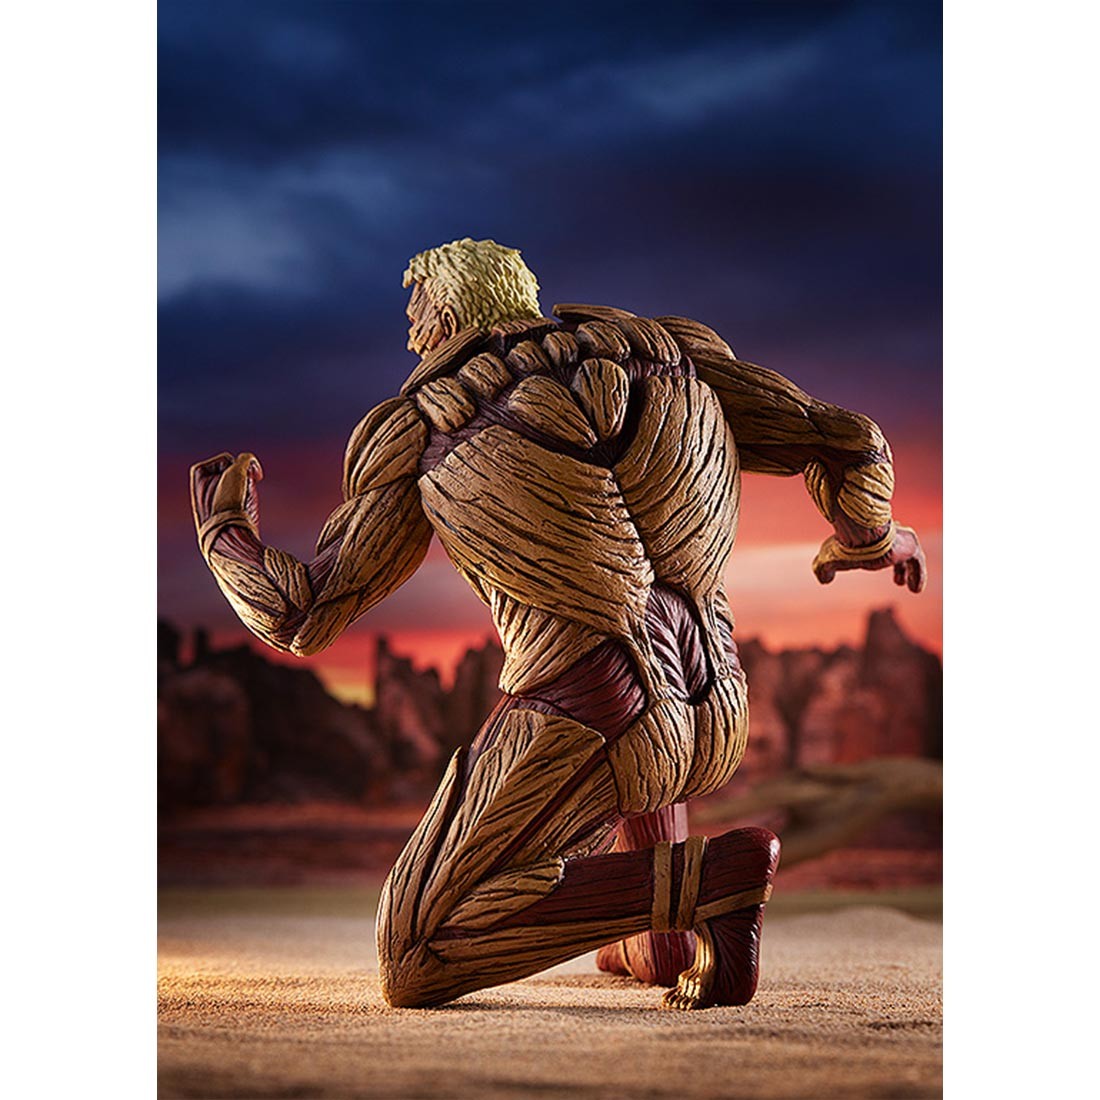 Boxlunch Good Smile Company Attack on Titan Pop up Parade Reiner Braun  (Armored Titan Ver.) Figure